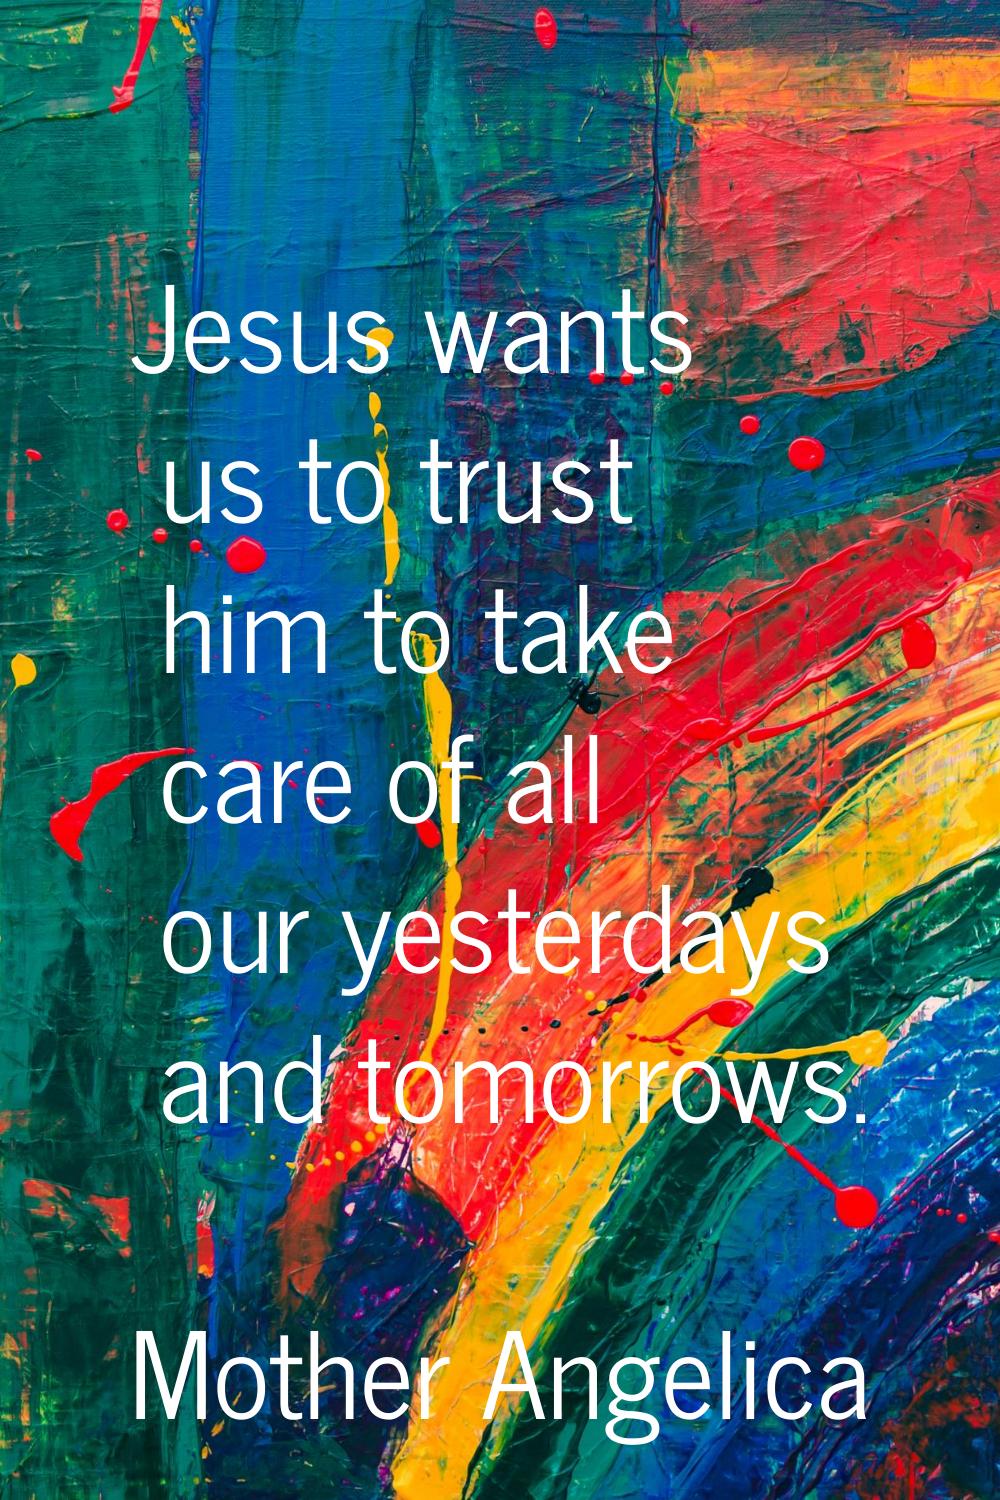 Jesus wants us to trust him to take care of all our yesterdays and tomorrows.